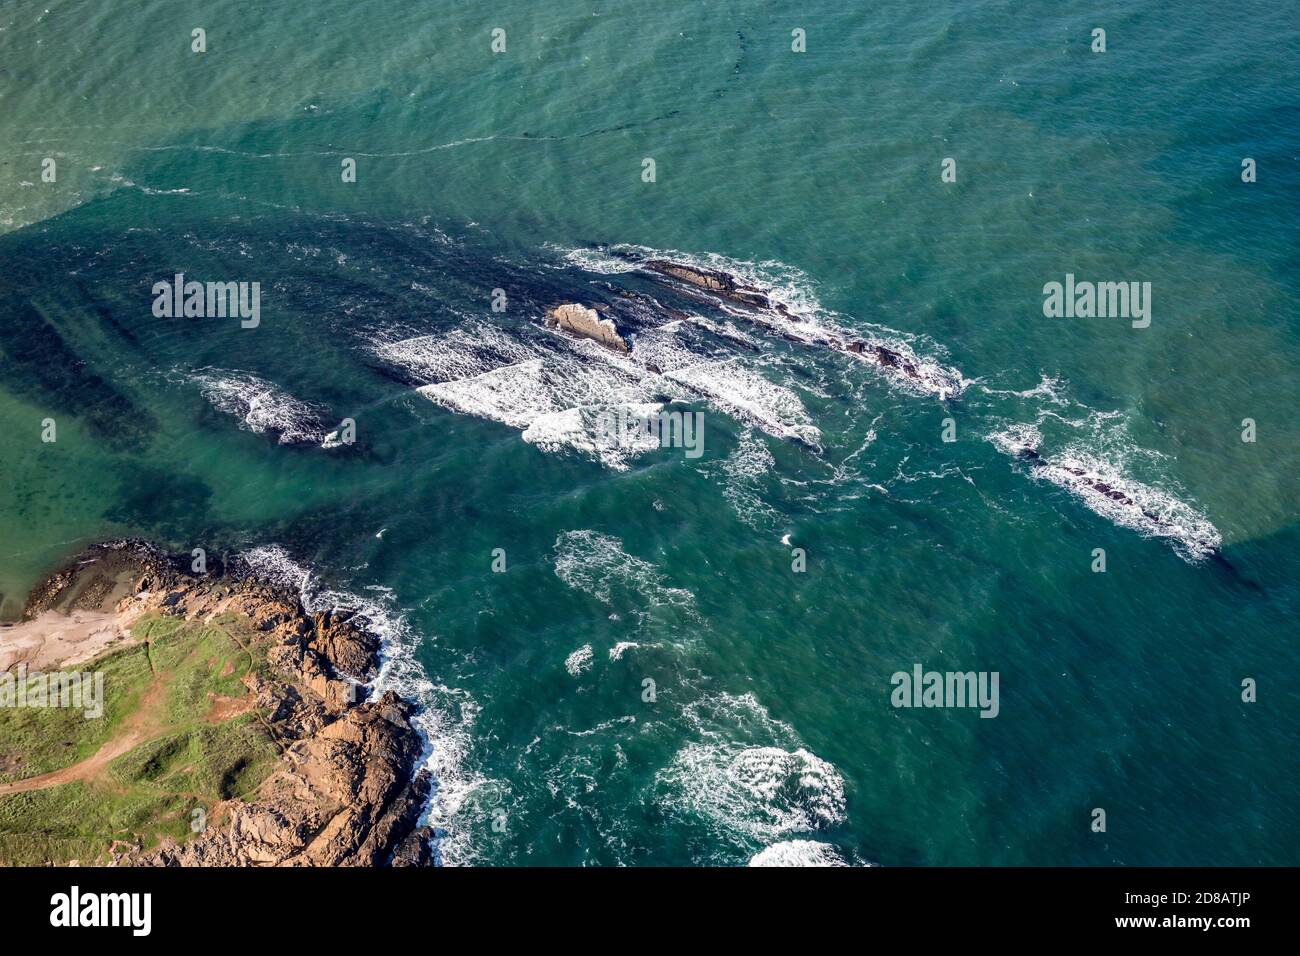 Shore cliffs, waves. Tandem motor paragliding over Black Sea shores near town of Ahtopol. Sunny autumn day, scenery colors and amazing landscapes and seascapes, Bulgaria Stock Photo